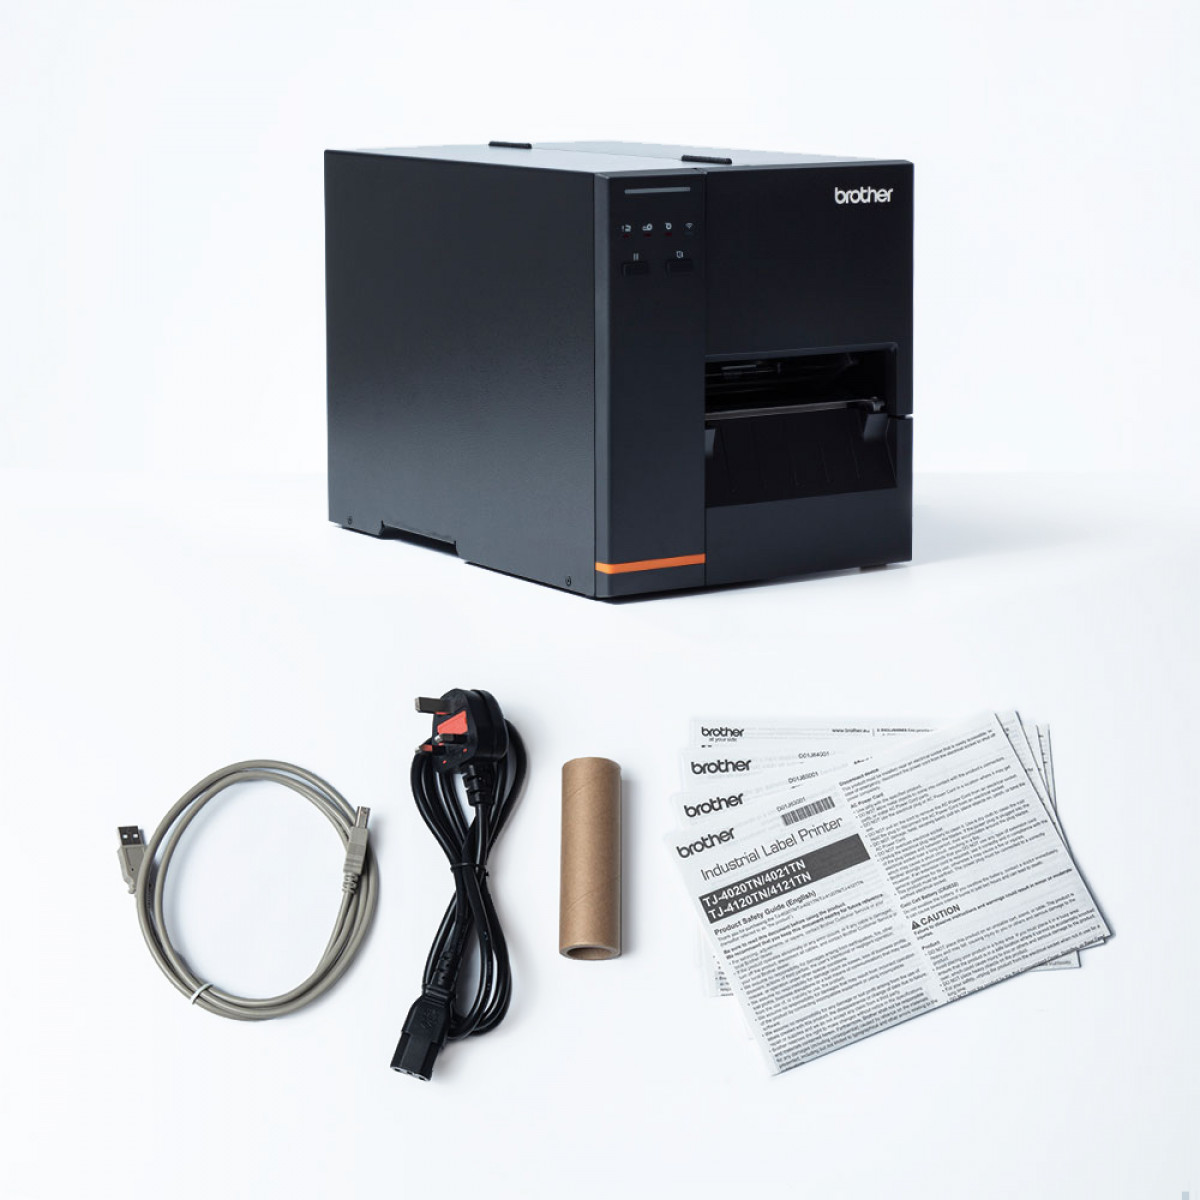 Brother TJ-4020TN printer as boxed